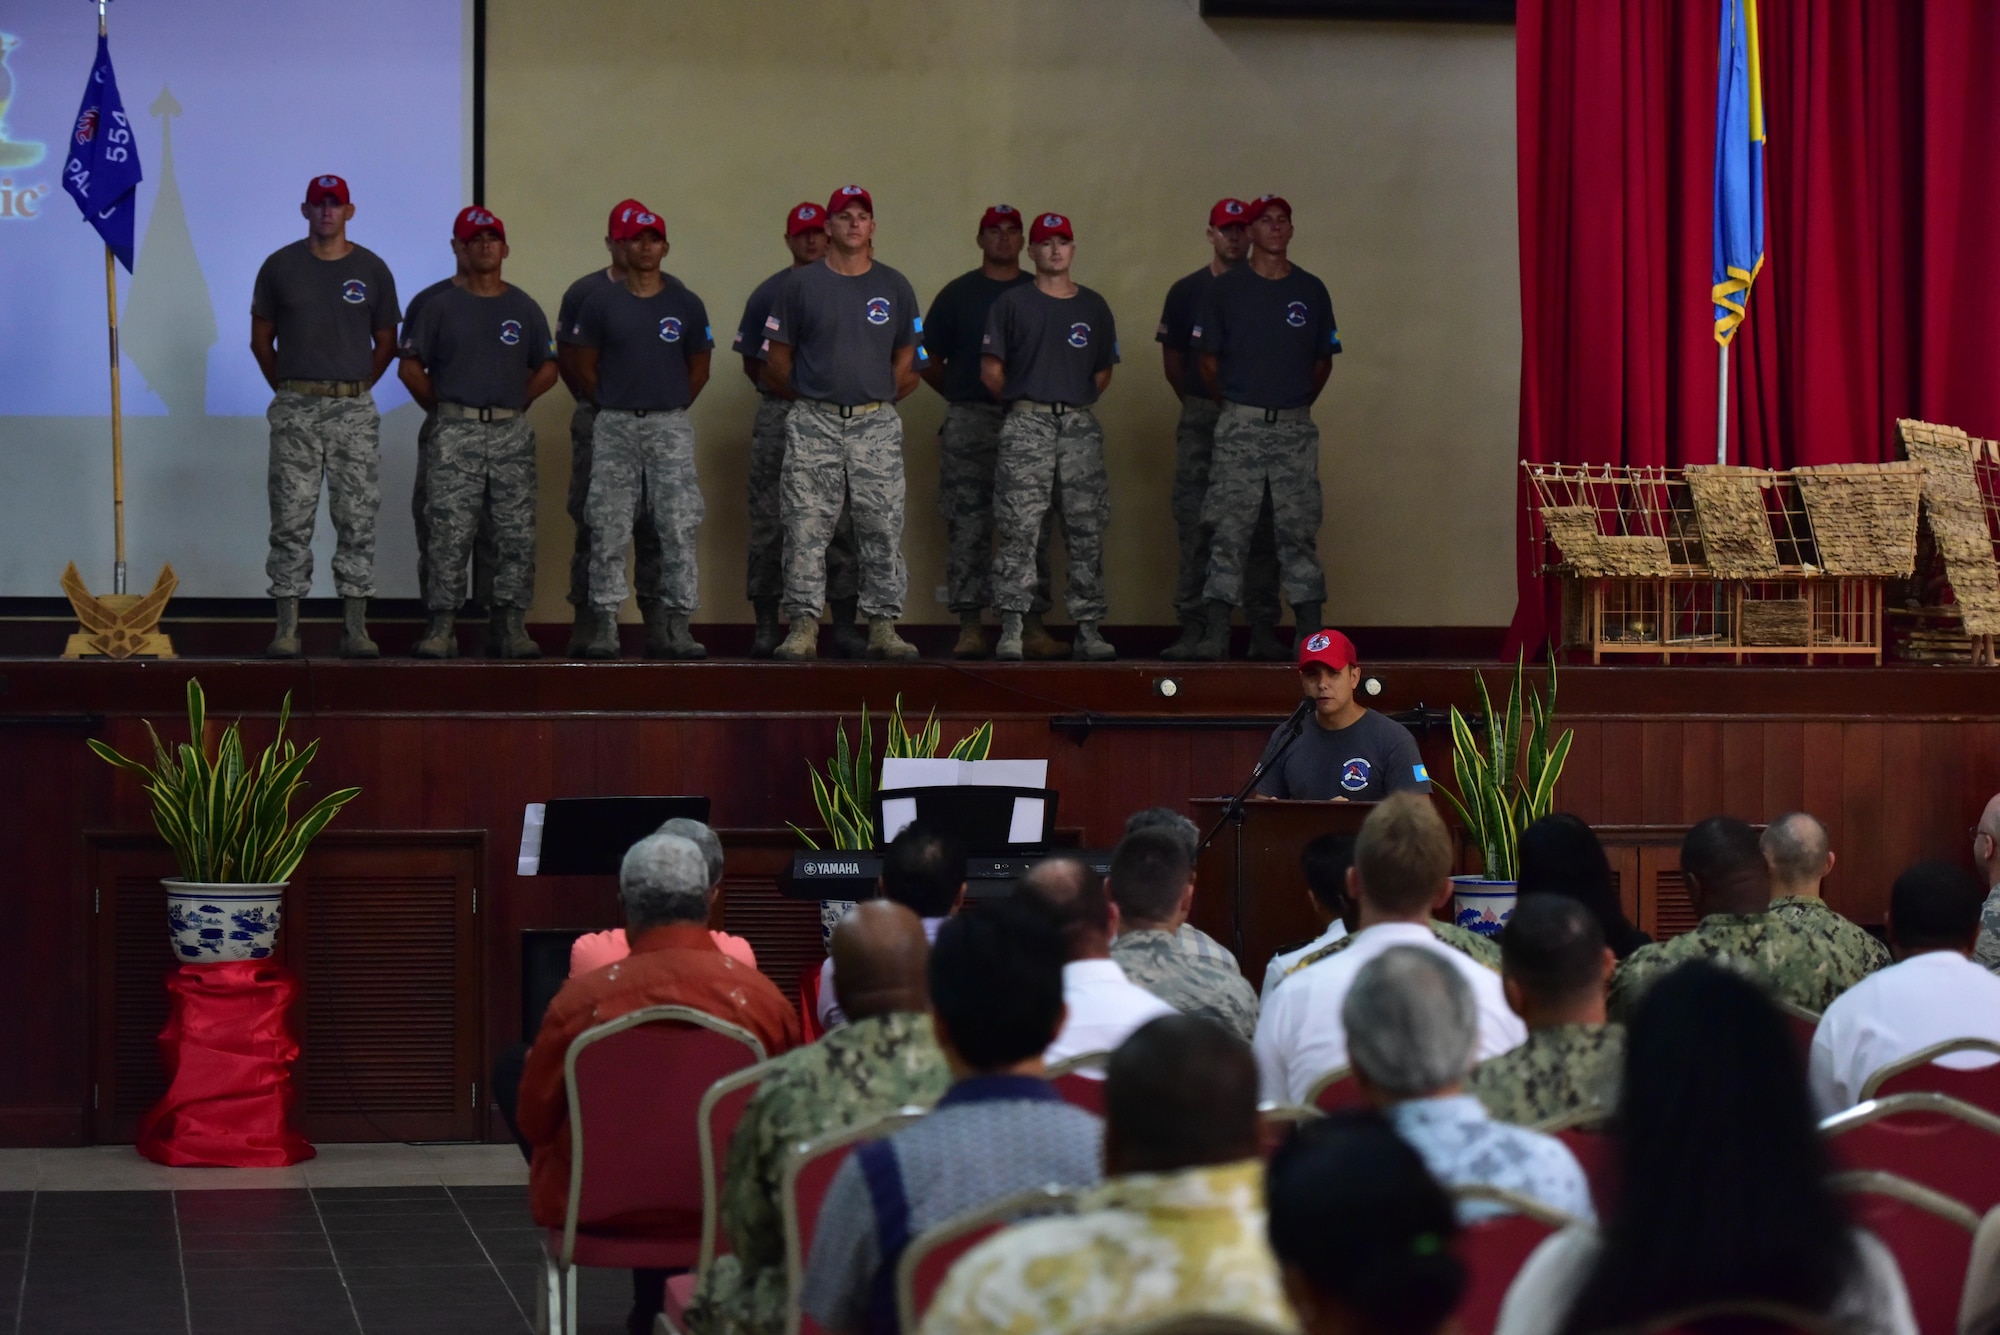 United States Air Force Capt. Naseem Ghandour, Civil Action Team 554-01 officer in charge and engineering flight deputy commander from the 554th RED HORSE Squadron from Andersen Air Force Base, Guam, speaks during a change of charge ceremony, held Feb. 19, 2016, at the Ngarachamayong Cultural Center, located in Palau’s Koror state. Airmen of CAT 554-01 provided construction capabilities, apprenticeship training, medical outreach and community engagement opportunities while deployed to the Republic of Palau. (U.S. Air Force photo by Staff Sgt. Christopher Stoltz/Released)